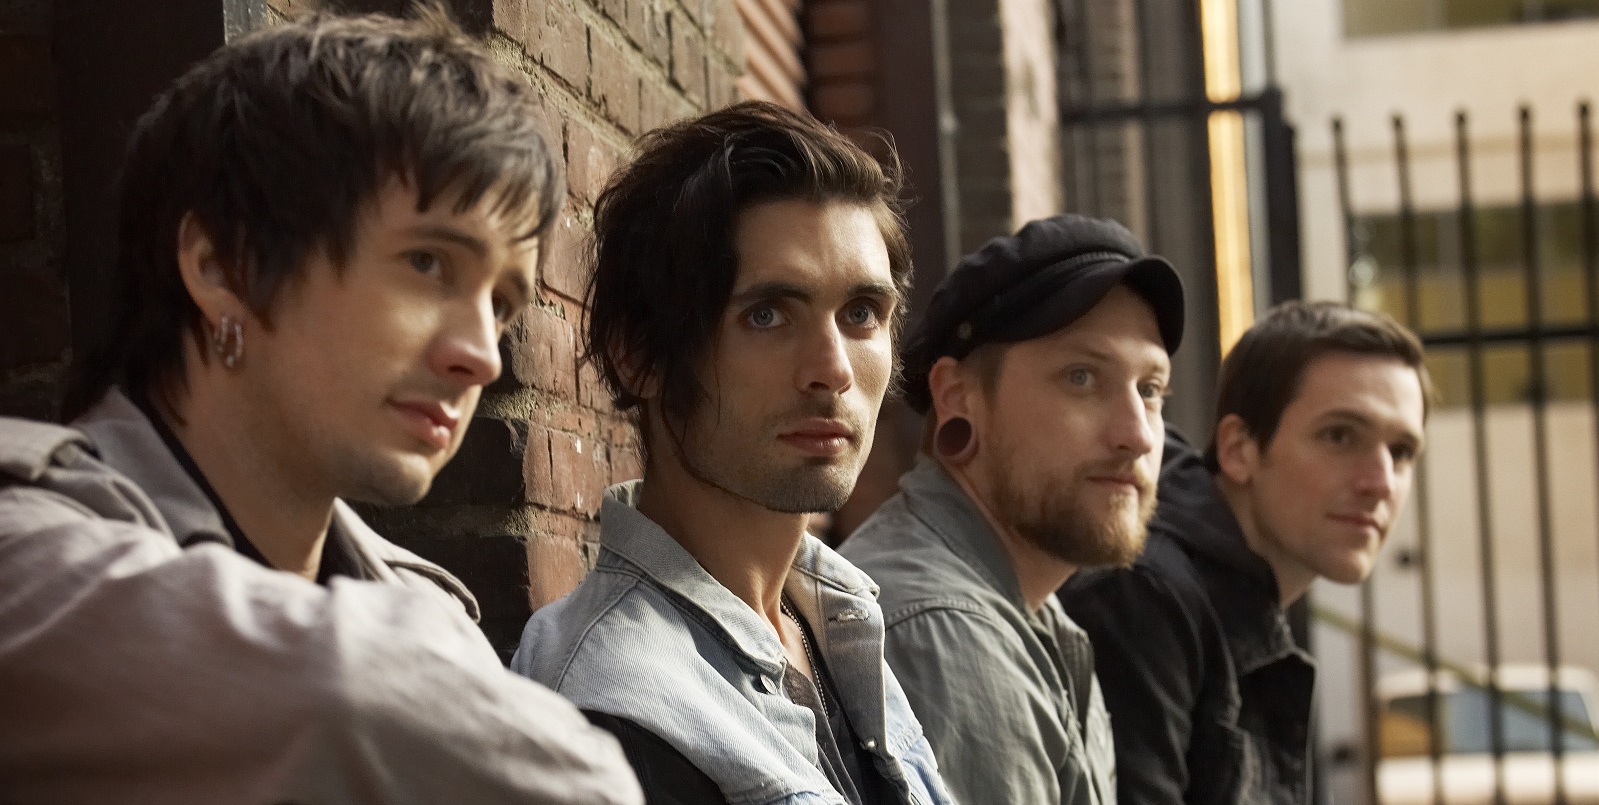 ALLAMERICAN REJECTS Share New LP Title? AlteRock